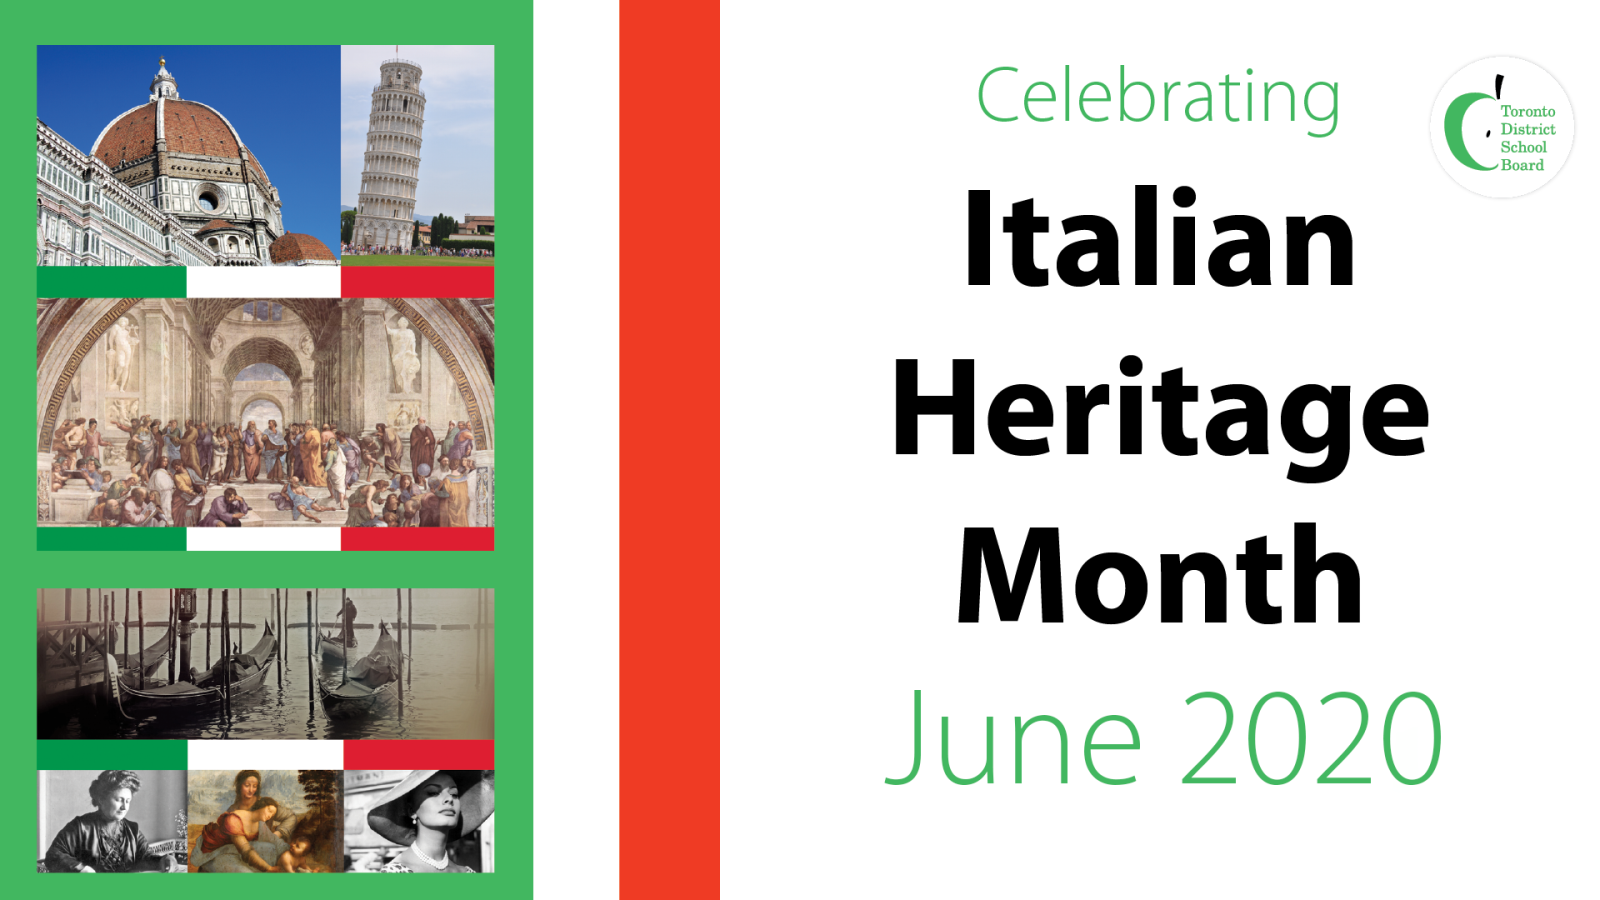 Poster recognizing Italian Heritage Month in the TDSB.